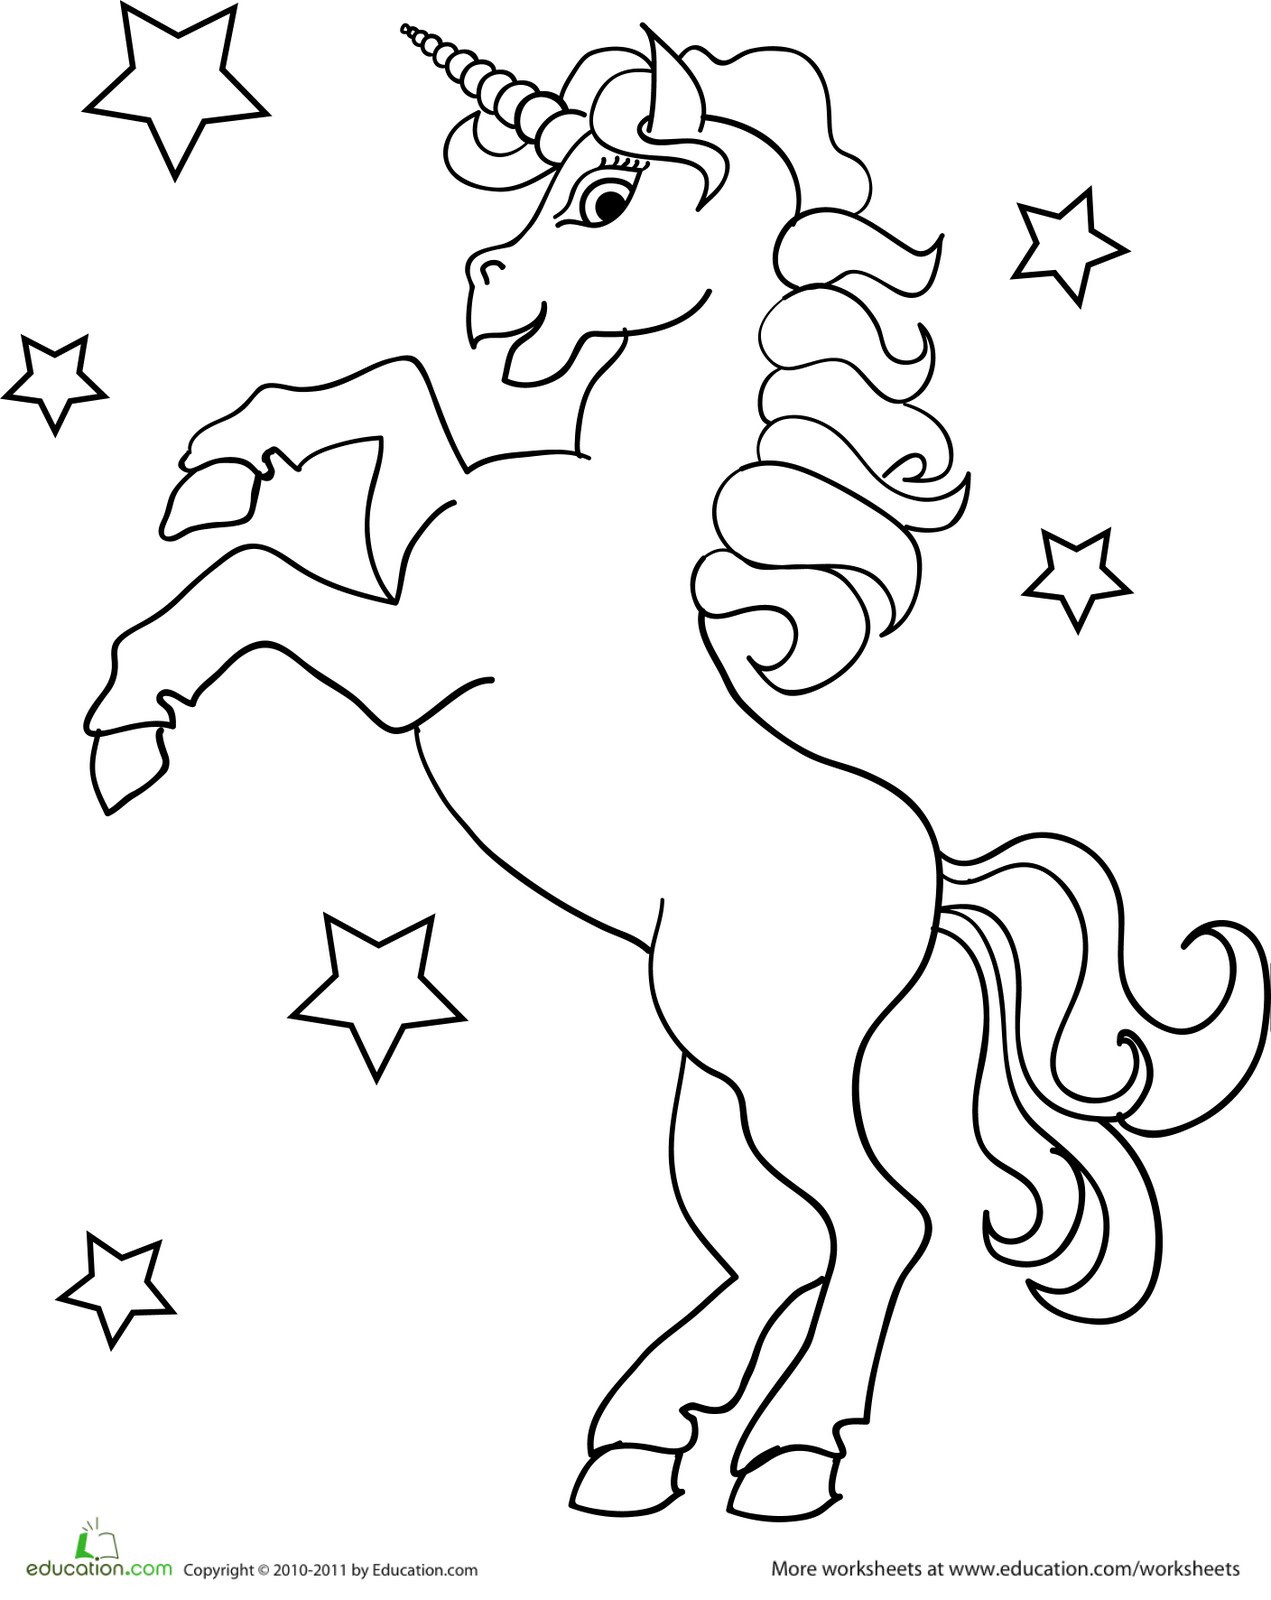 Unicorns Coloring Pages For Kids
 Flying Unicorn Coloring Pages For Kids